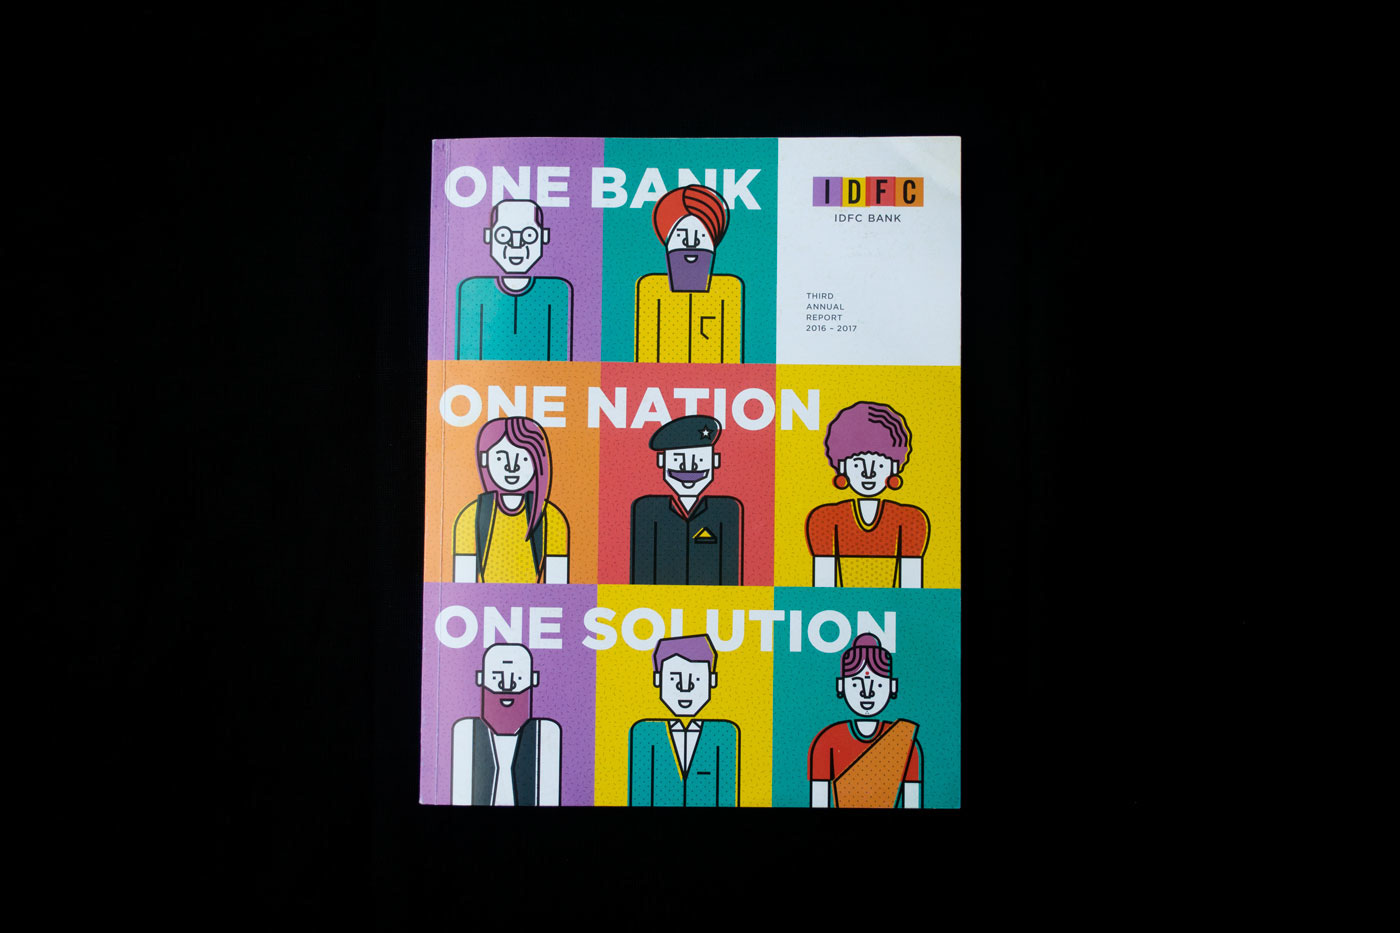 annual report Bank IDFC corporate ILLUSTRATION  digital infrastructure people cover finance